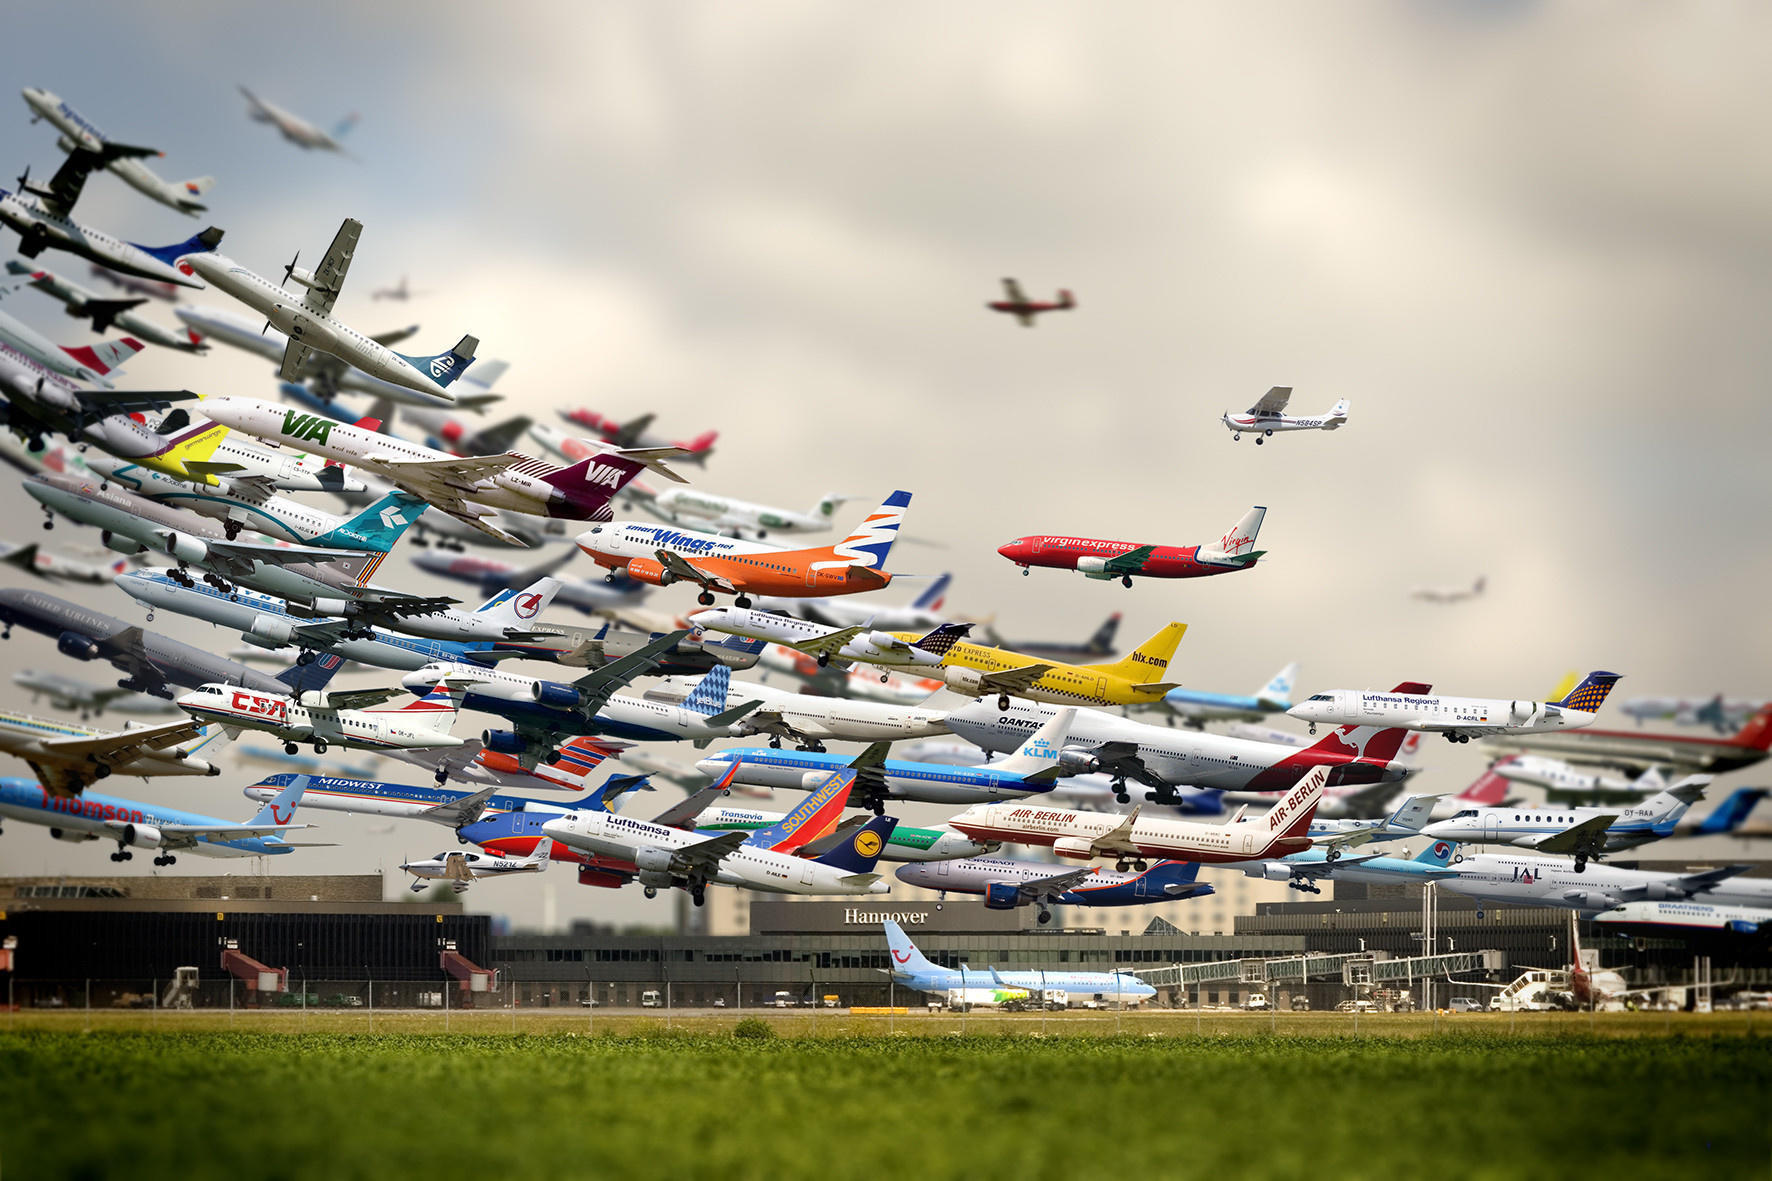 A multiple exposure shot of various airplanes taking off at the Hannover Airport. 